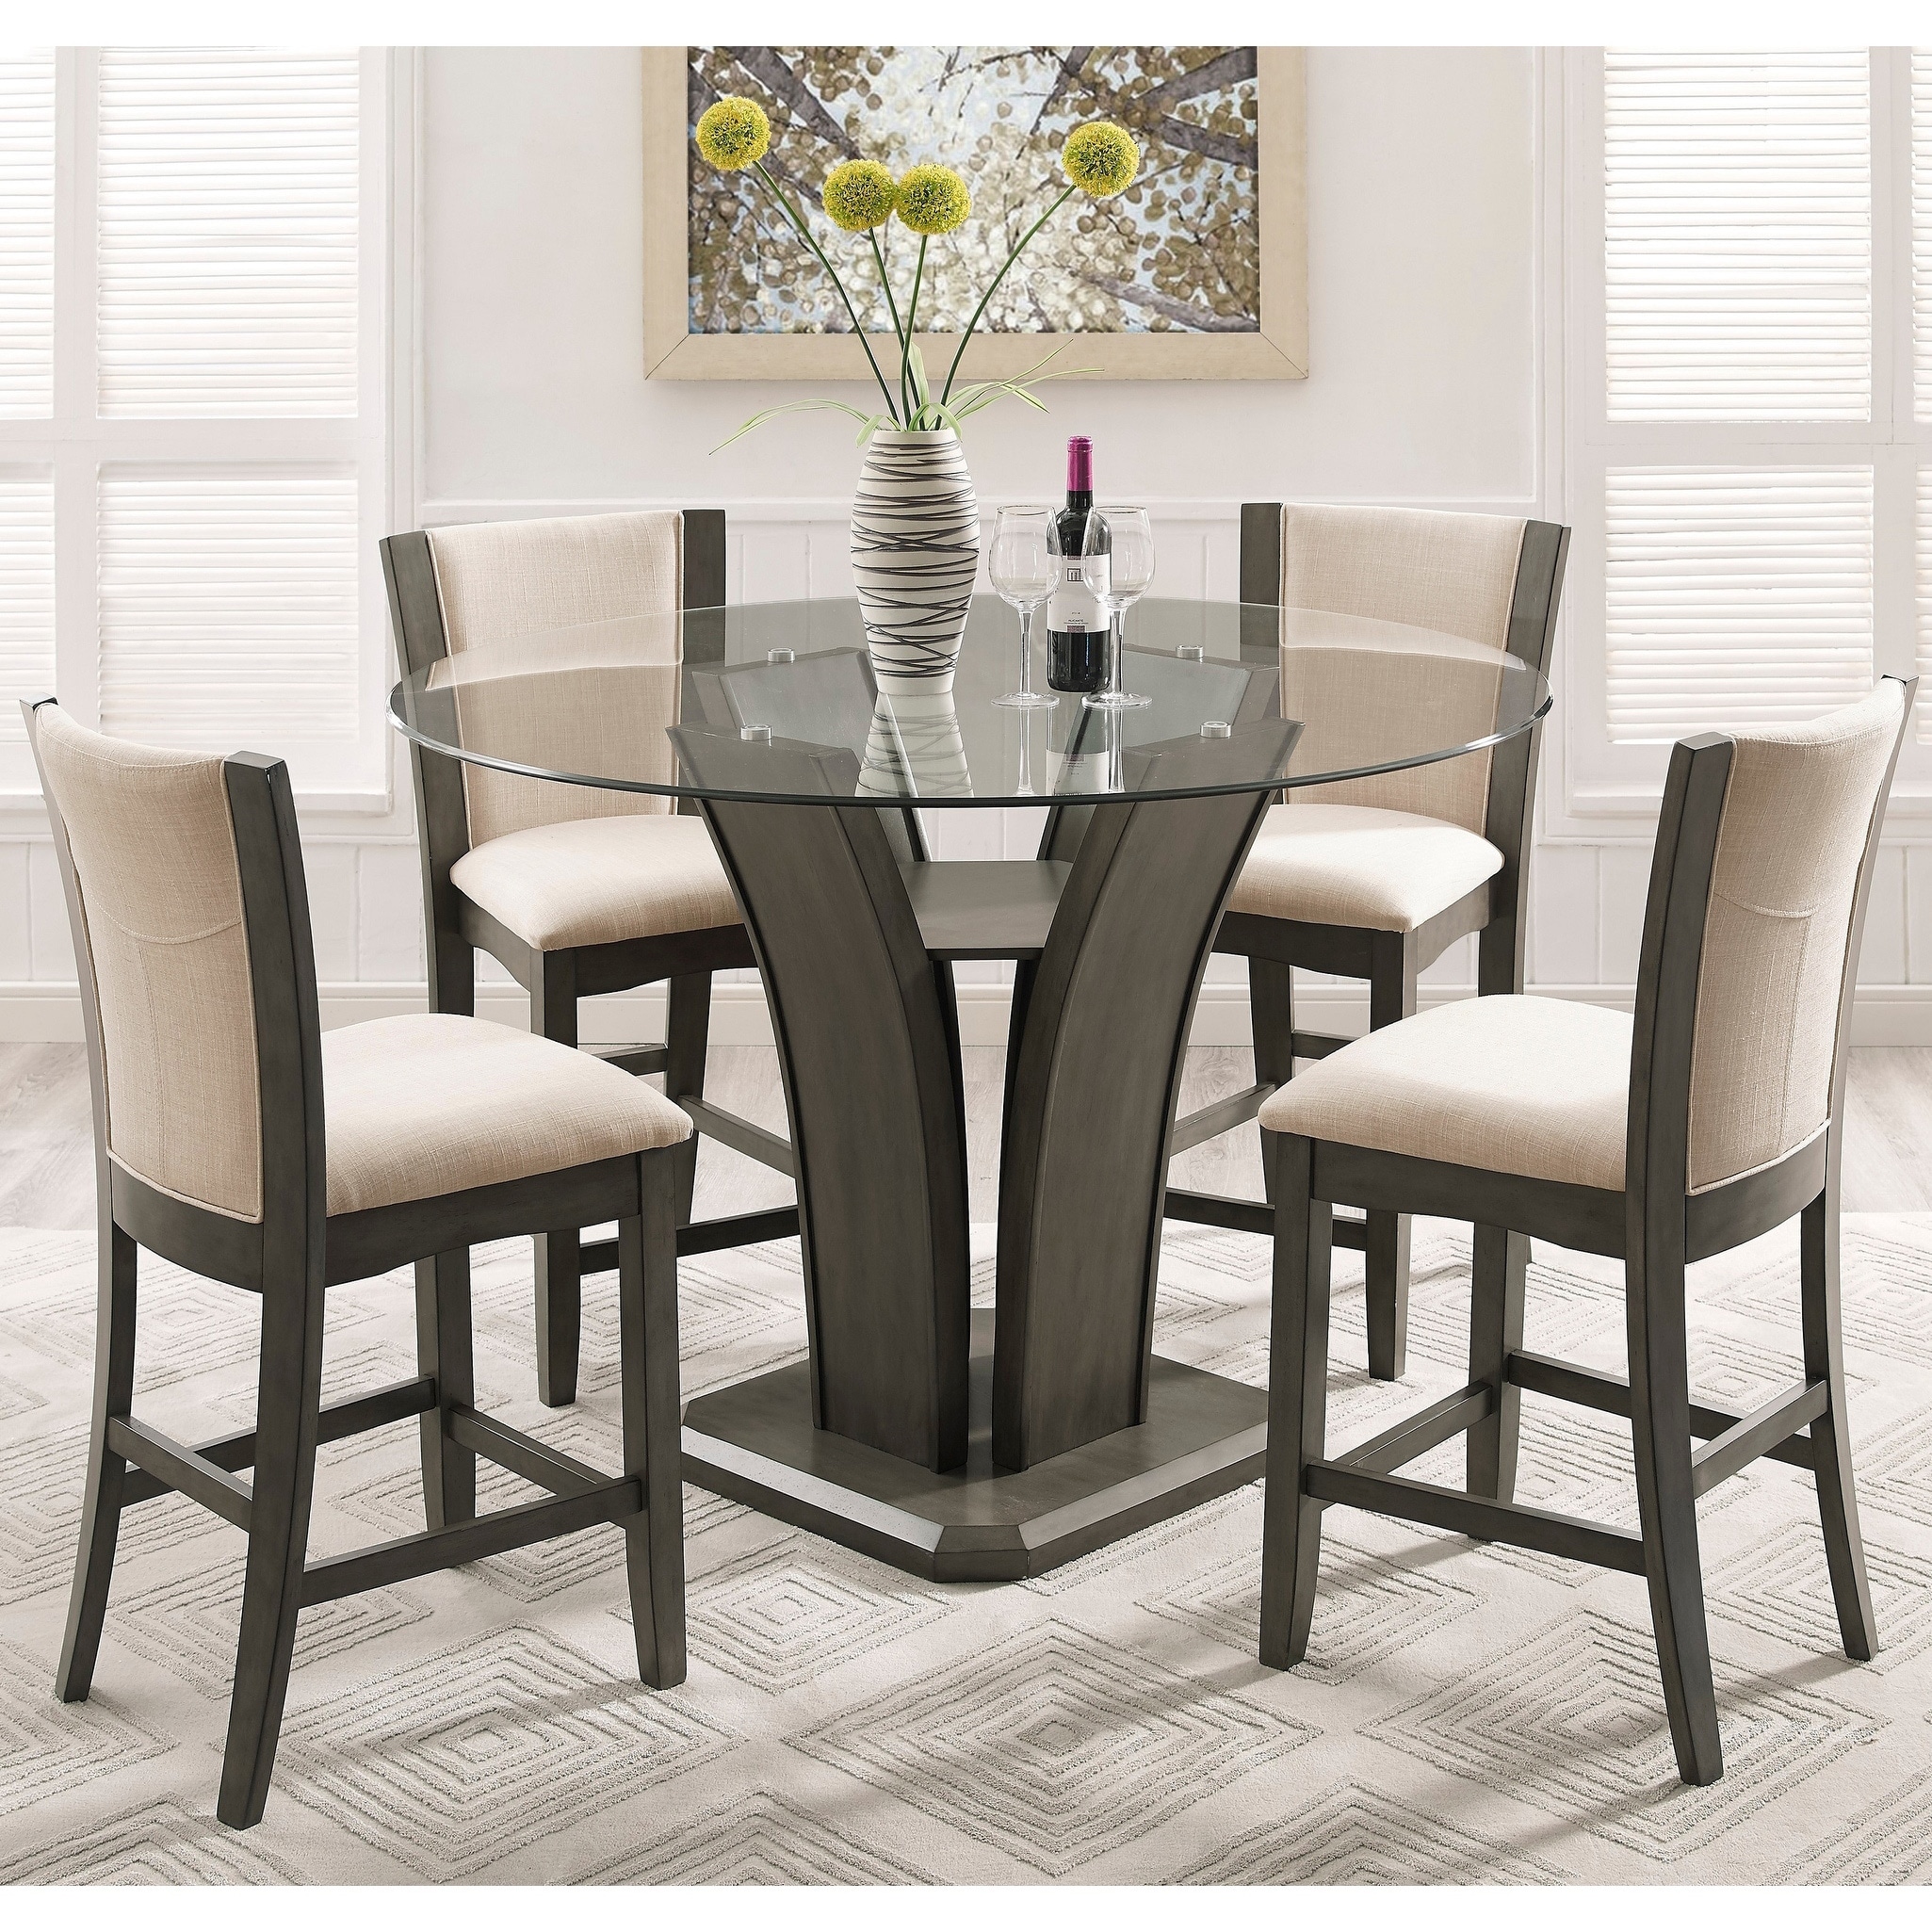 Kecco Gray 5 Piece Round Glass Top Counter Height Dining Set Overstock 16685521